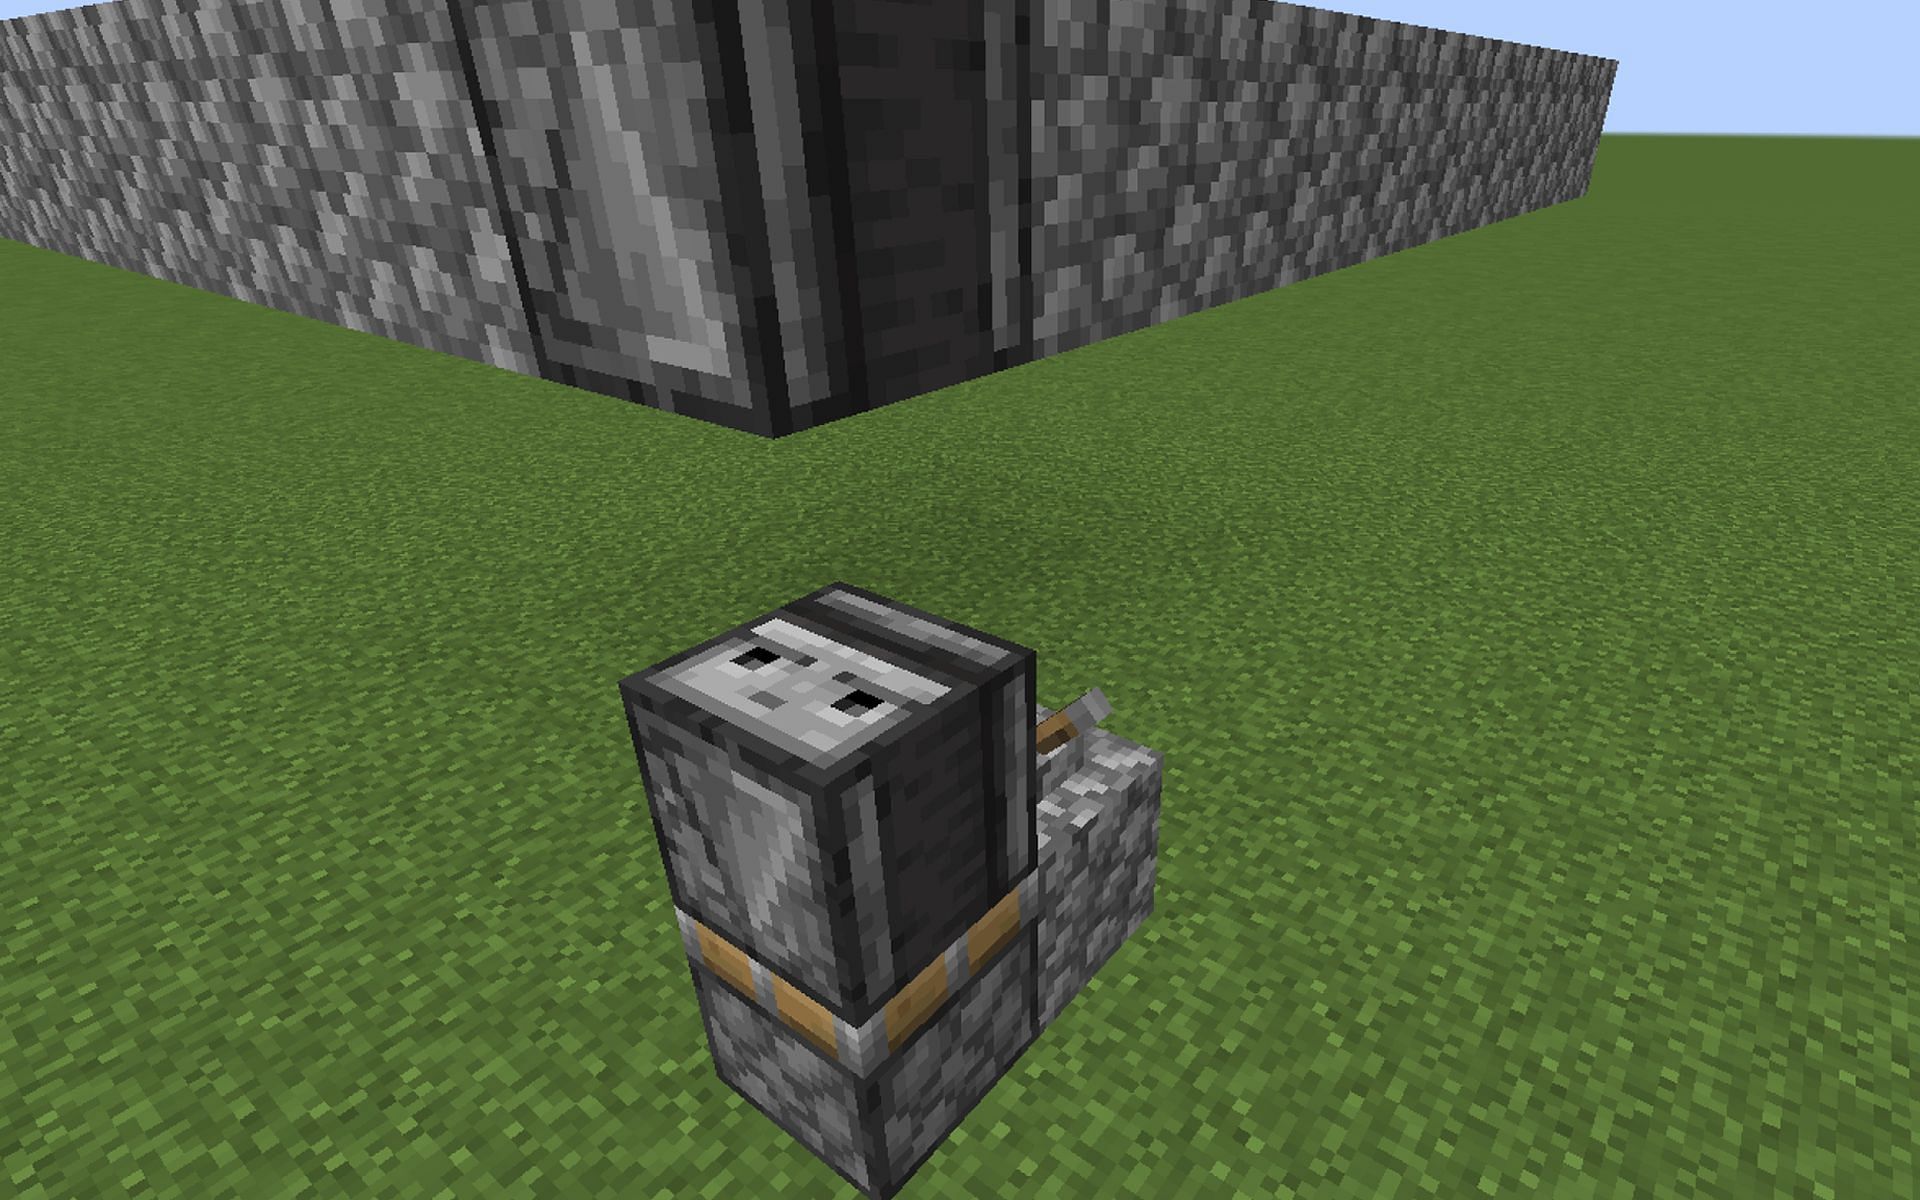 An image of a lag machine being built in-game. Image via Minecraft.